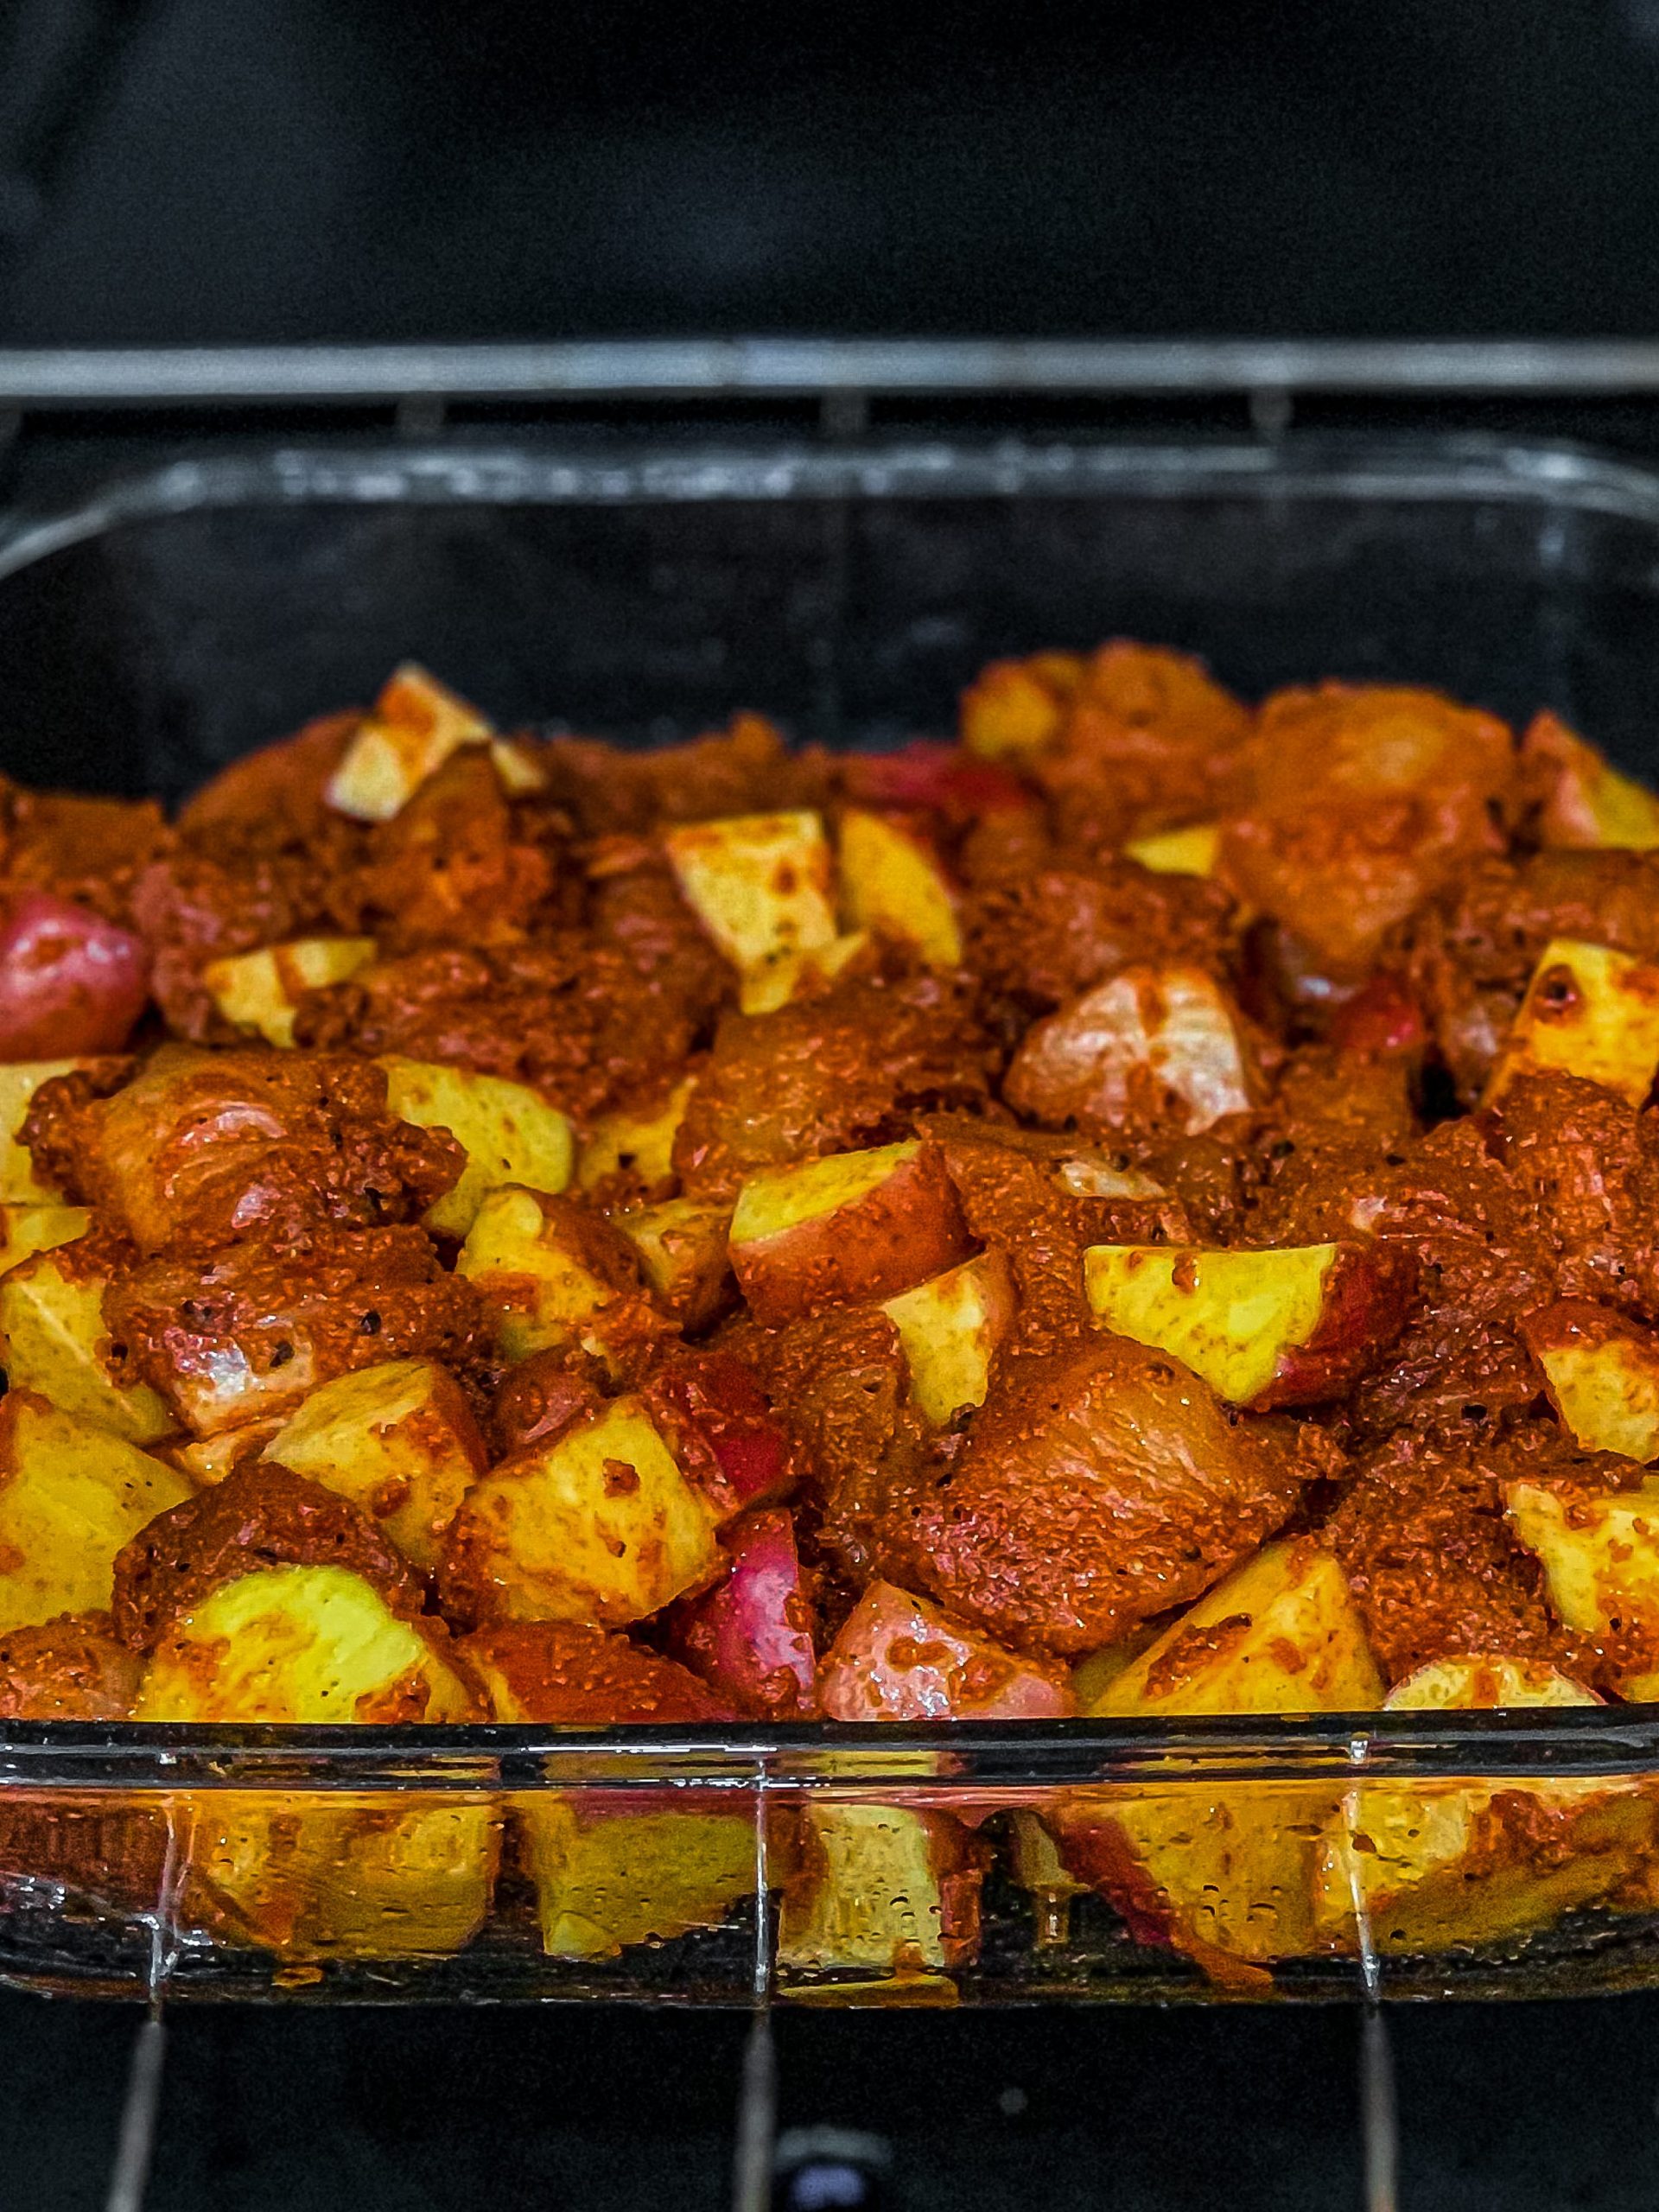 Pour the chicken and potatoes into the prepared baking dish and bake for 45 minutes, stirring every 15 minutes until cooked through, crispy, and browned on the outside.